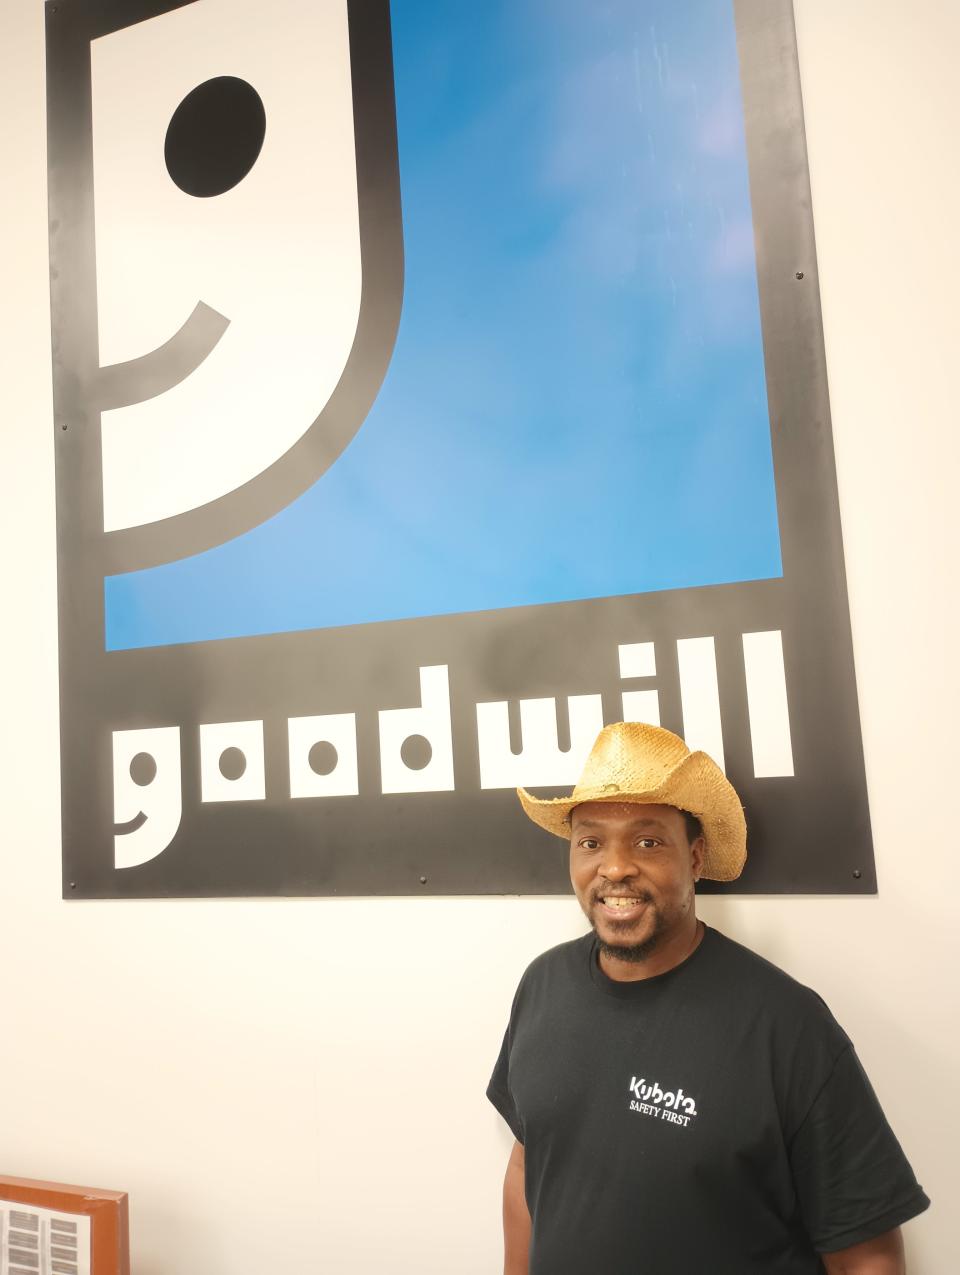 Welder Byron Mitchell successfully completed a welding certificate based in Athens at the Goodwill of North Georgia. The mission of Goodwill is to put people to work.